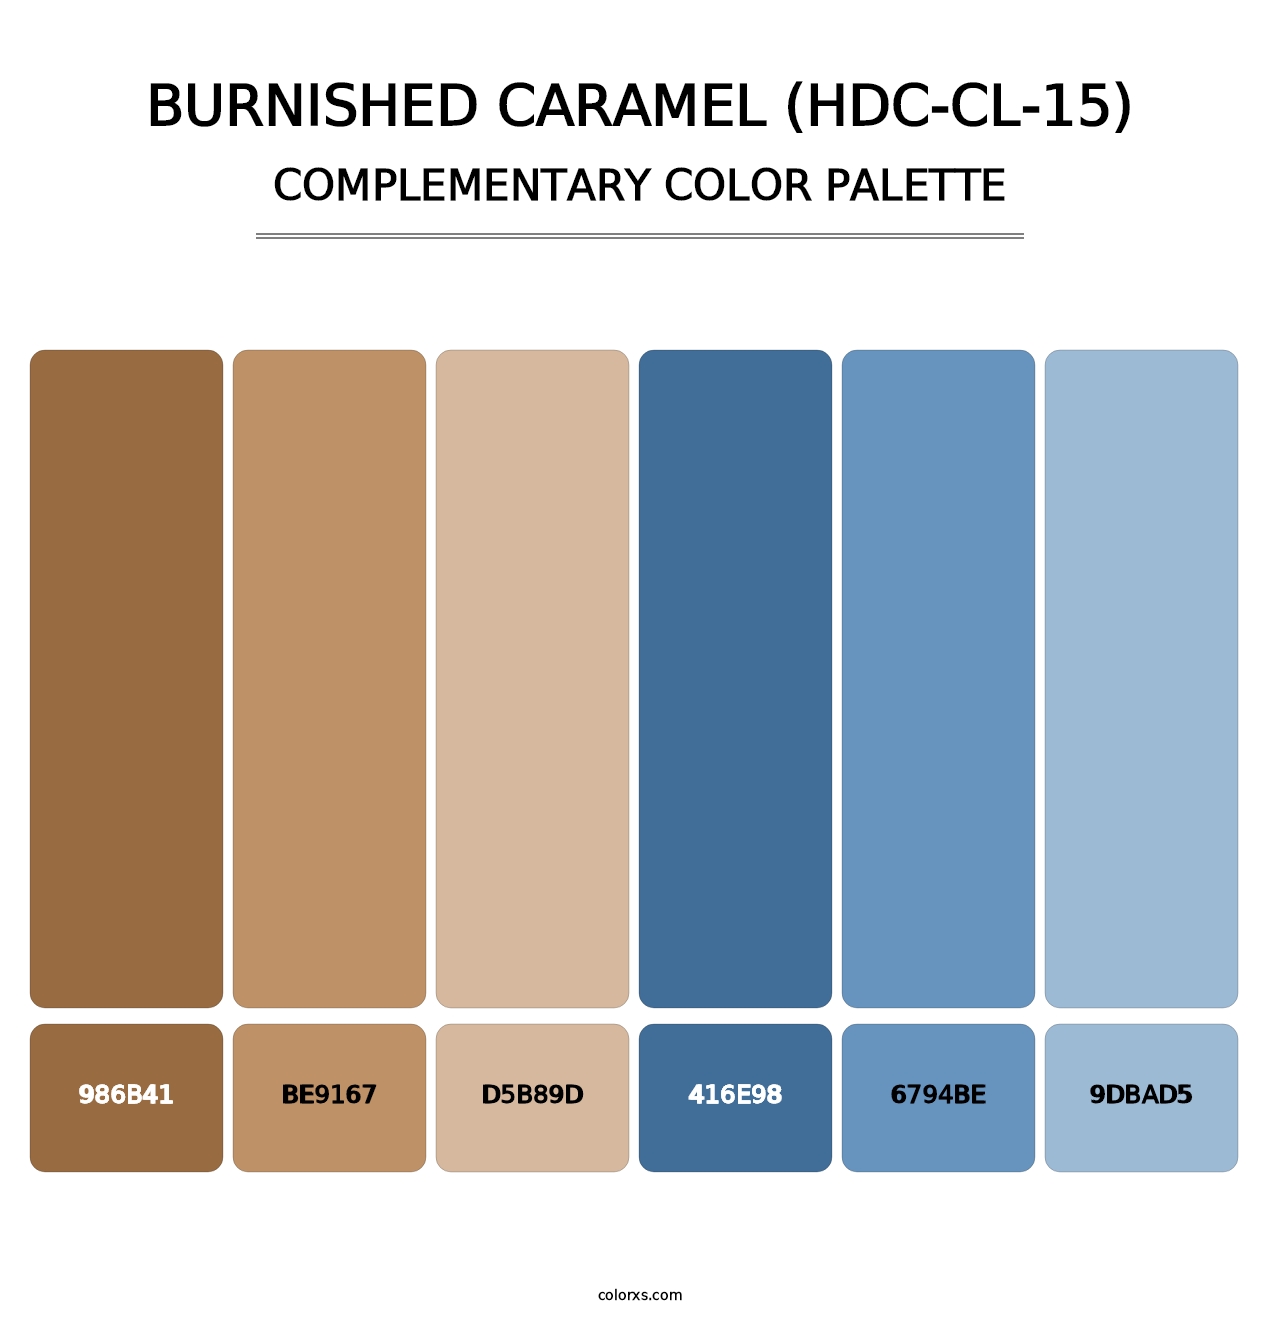 Burnished Caramel (HDC-CL-15) - Complementary Color Palette